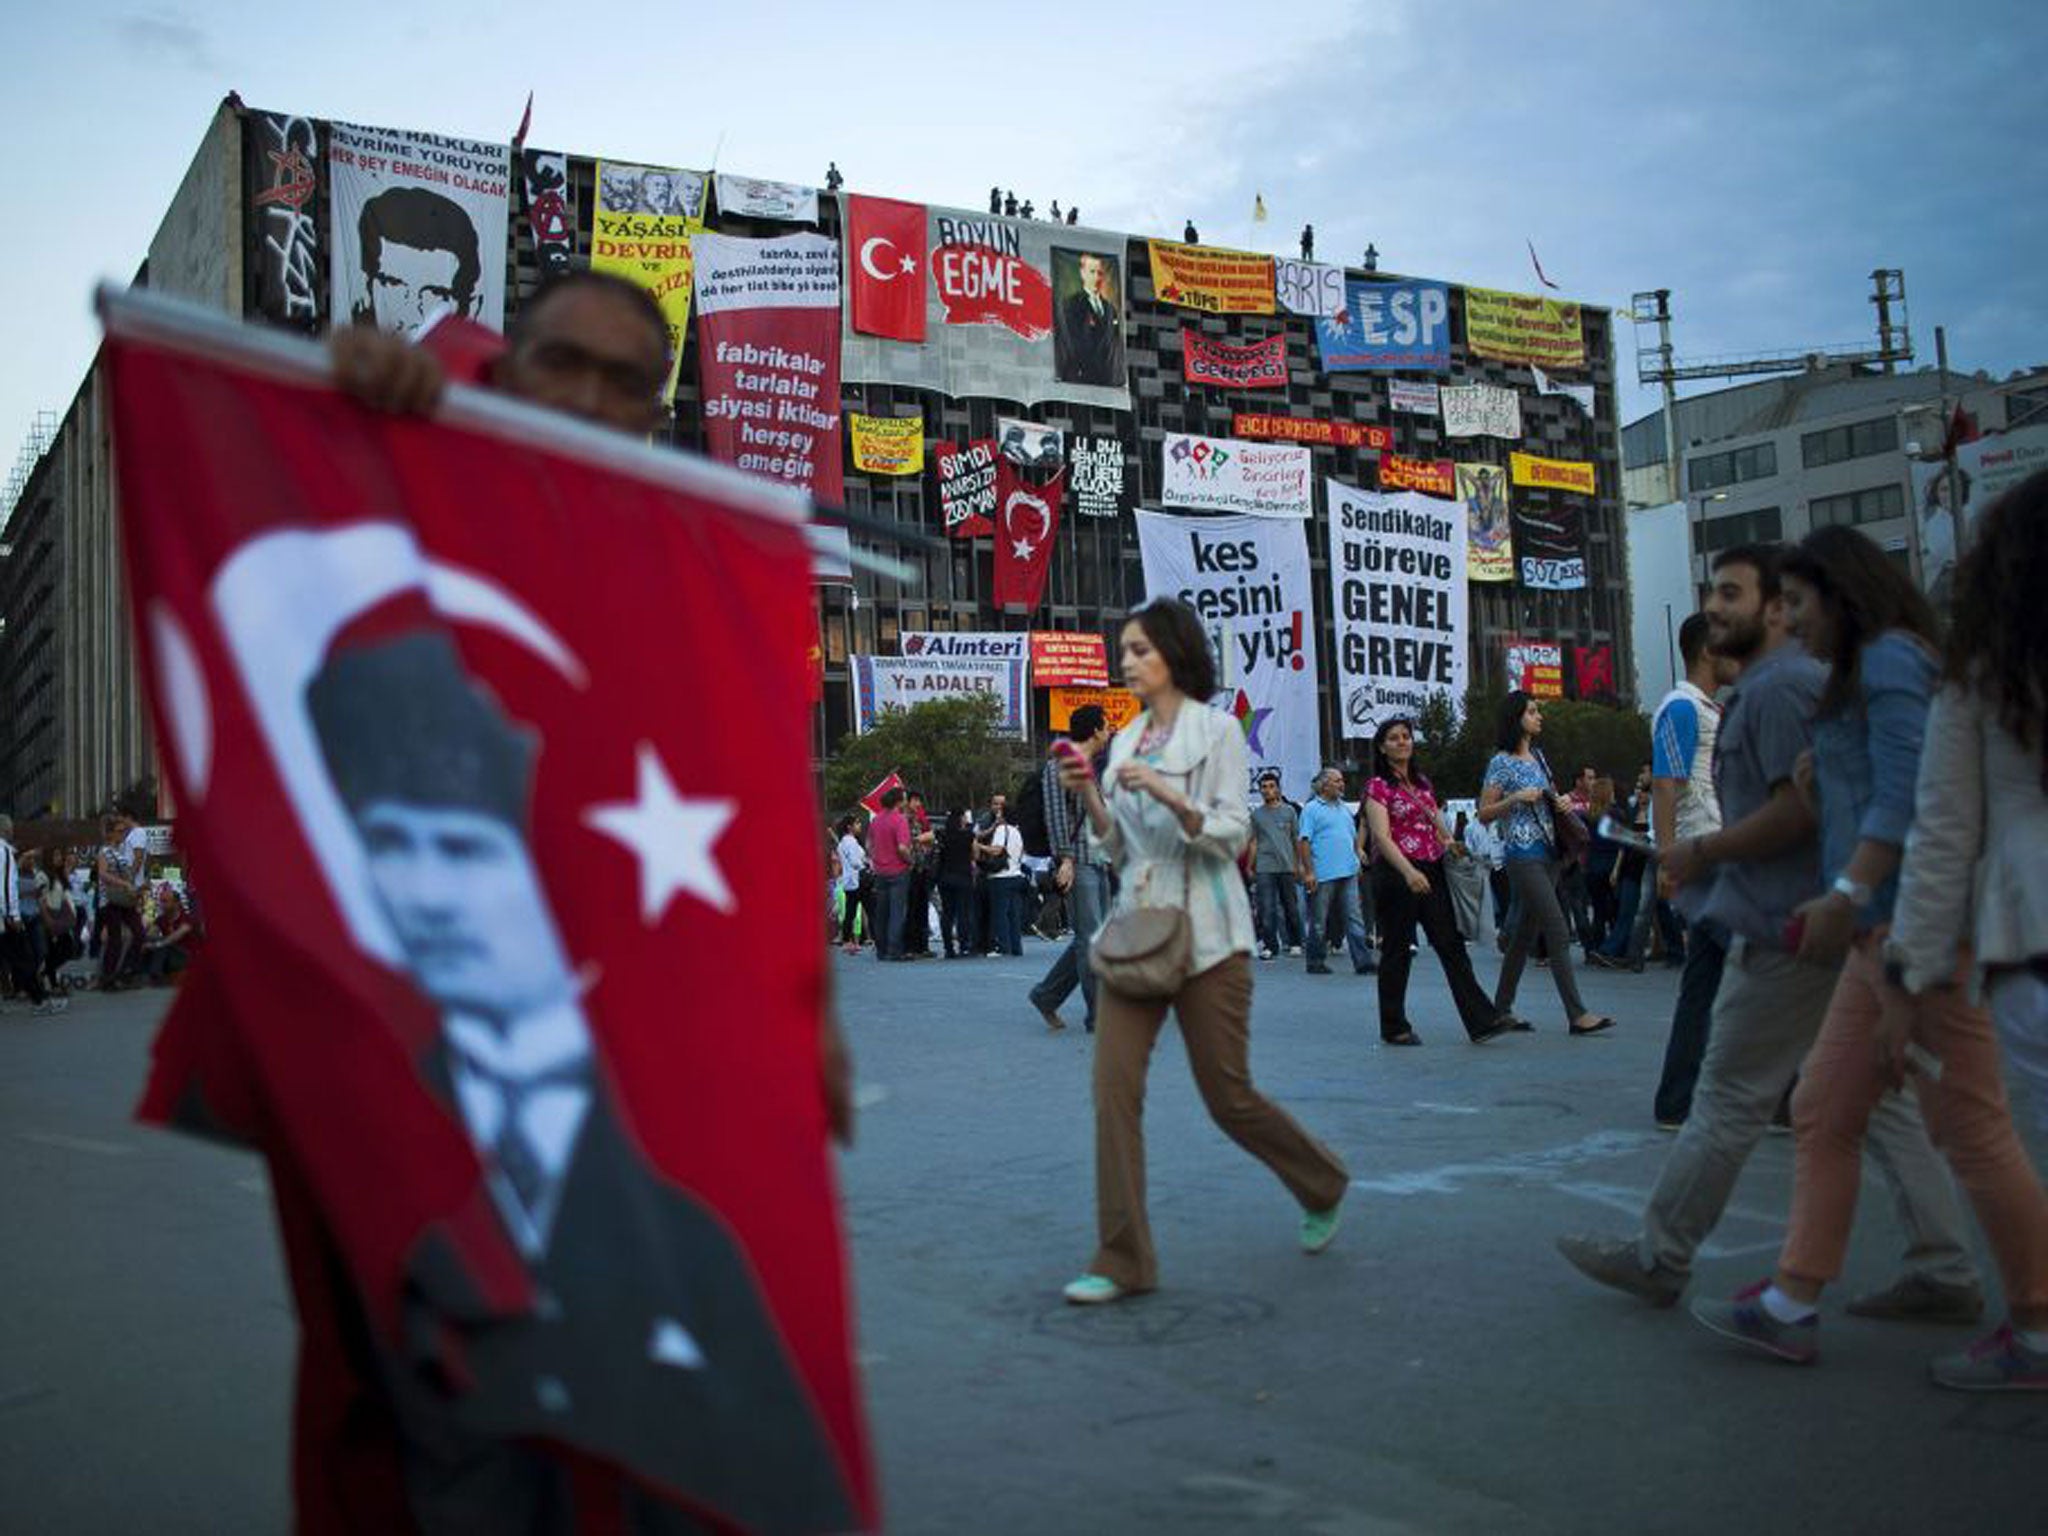 The government miscalculated its response to the demos in Istanbul